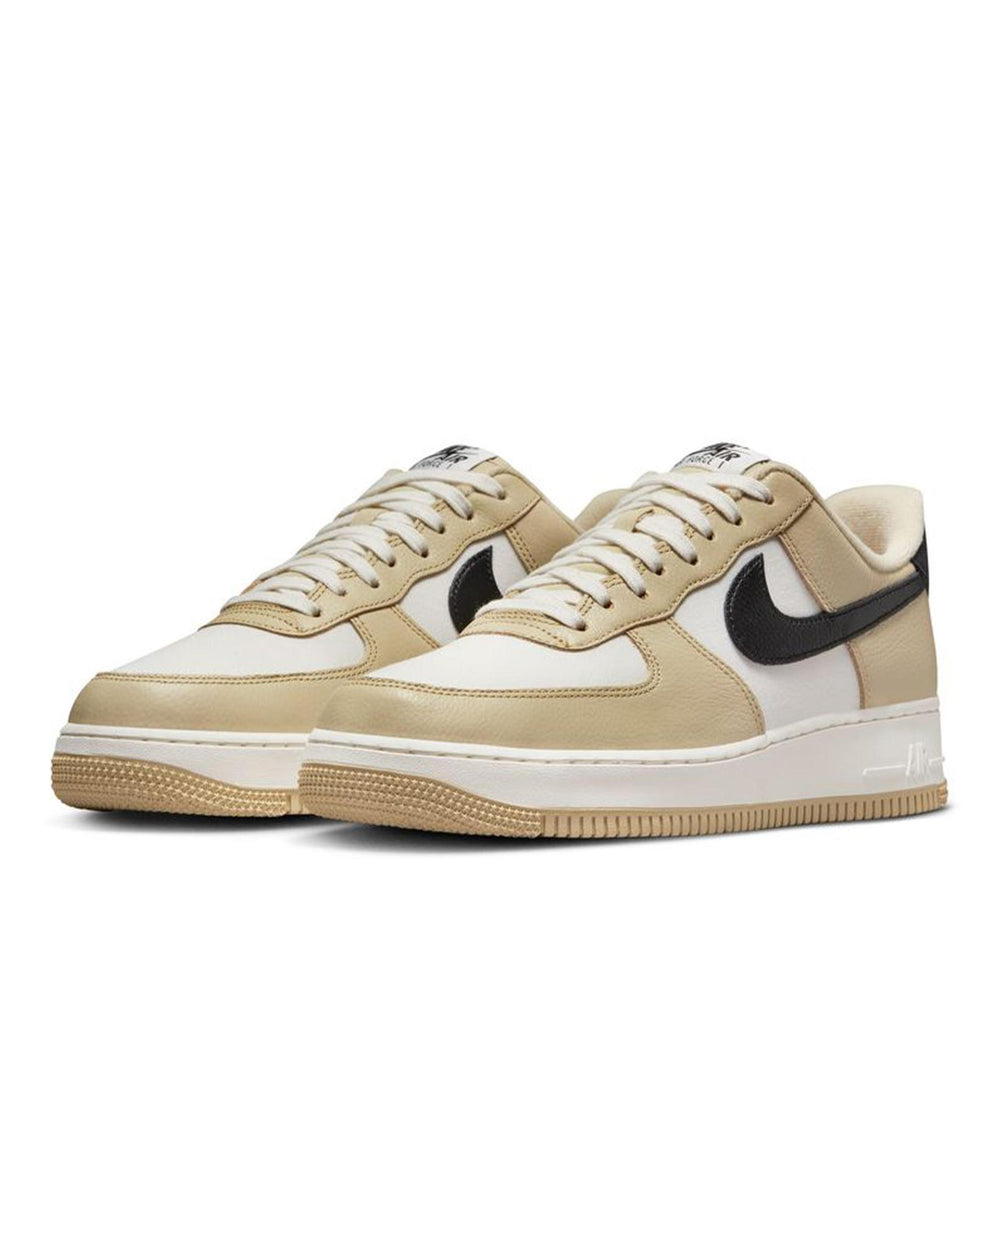 Men's Airforce 1 Lv-8 Black Gold, Men's Low Ankle Sneakers